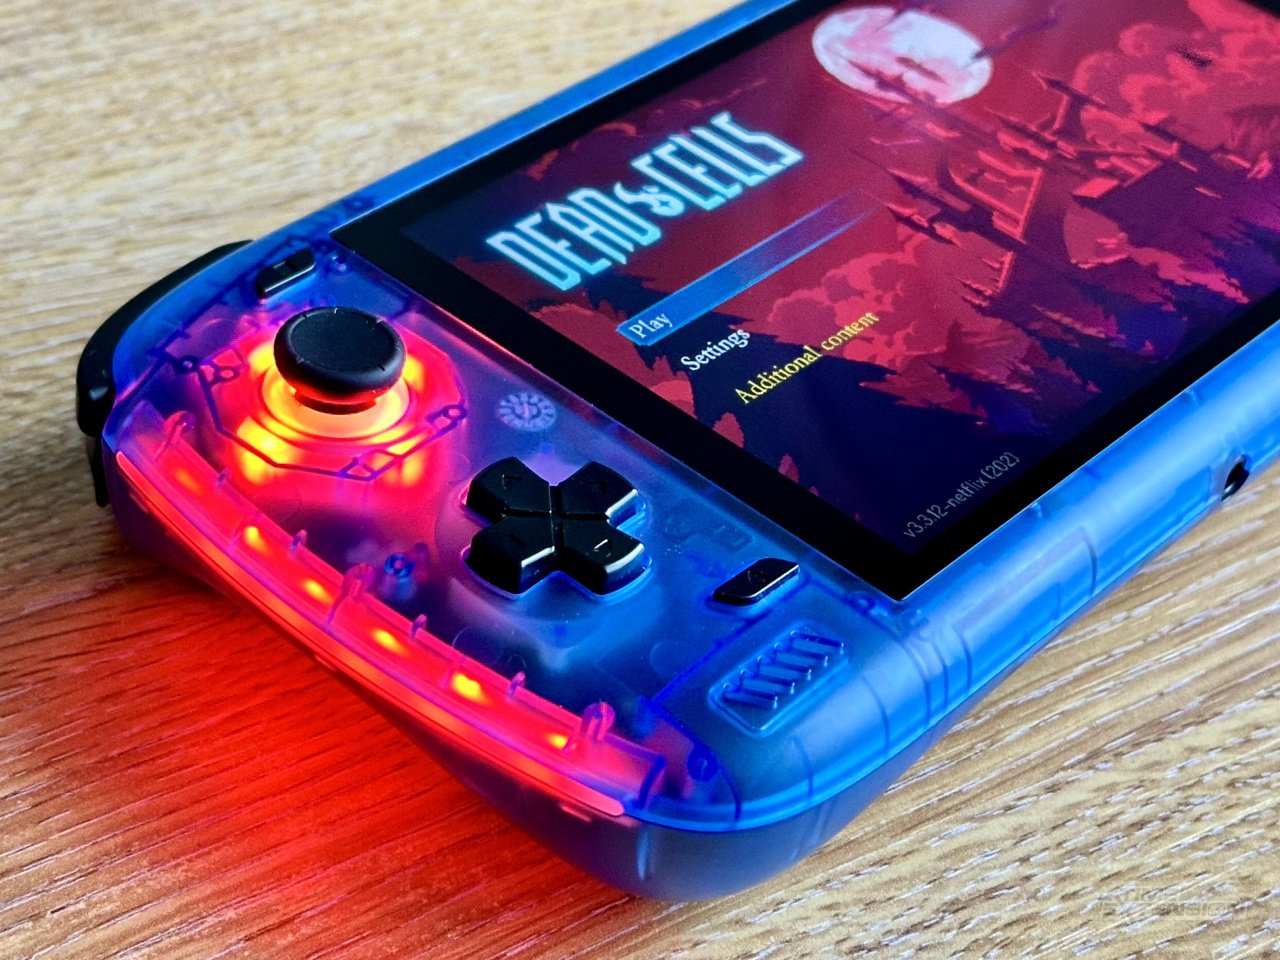 AYN Odin2 is a Snapdragon 8 Gen 2 handheld game console for $299